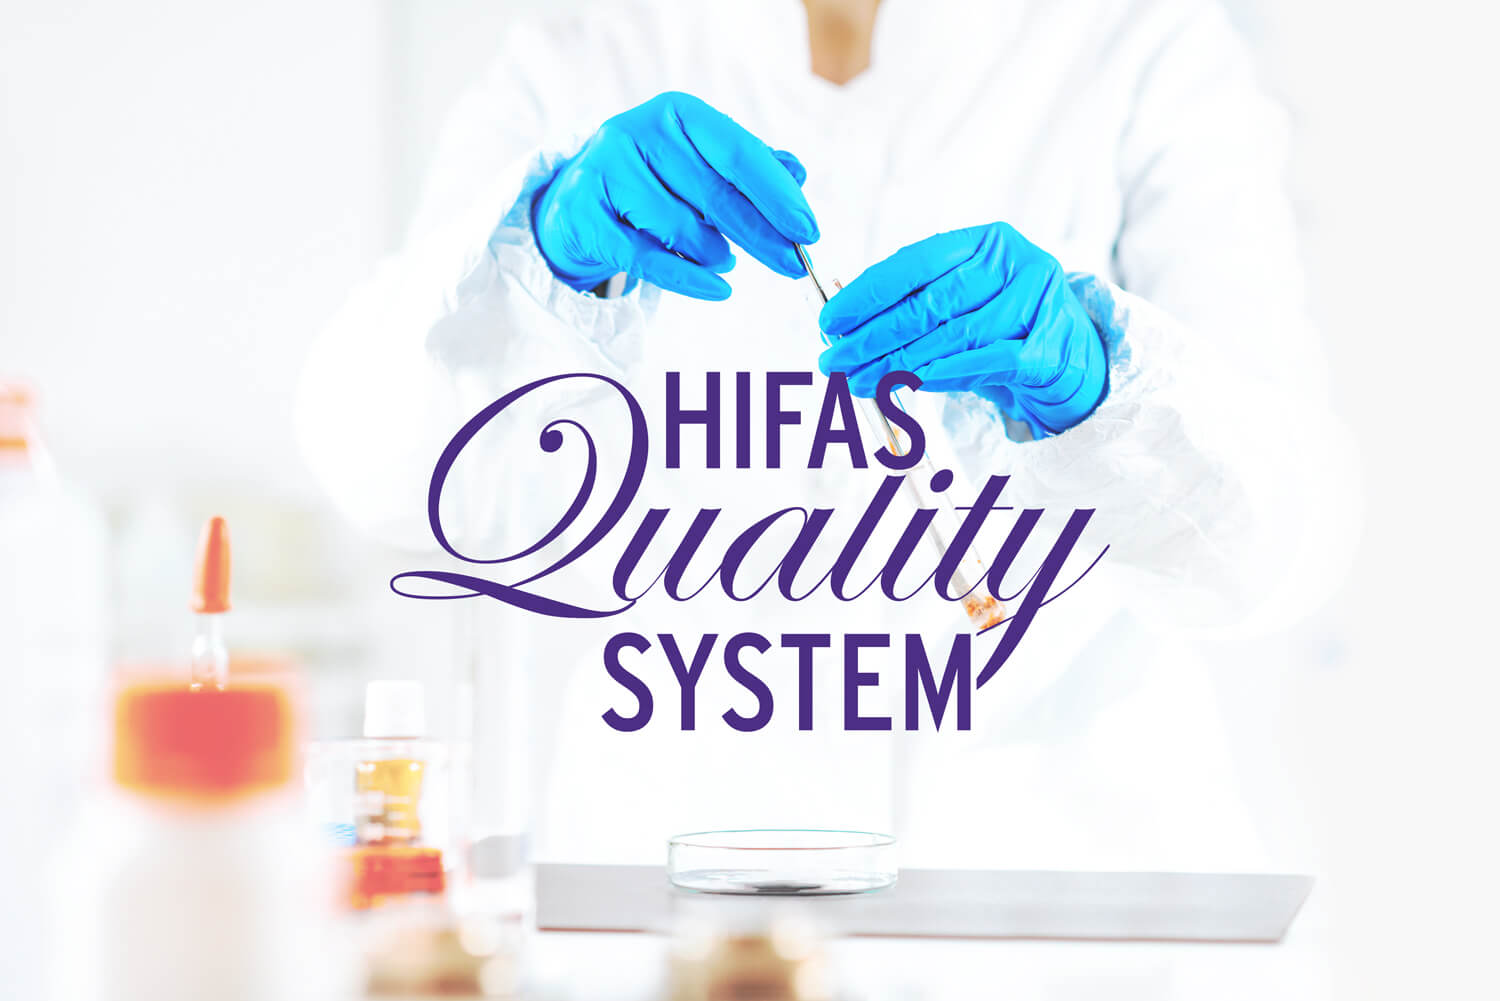 Hifas-Quality-System-Image-1